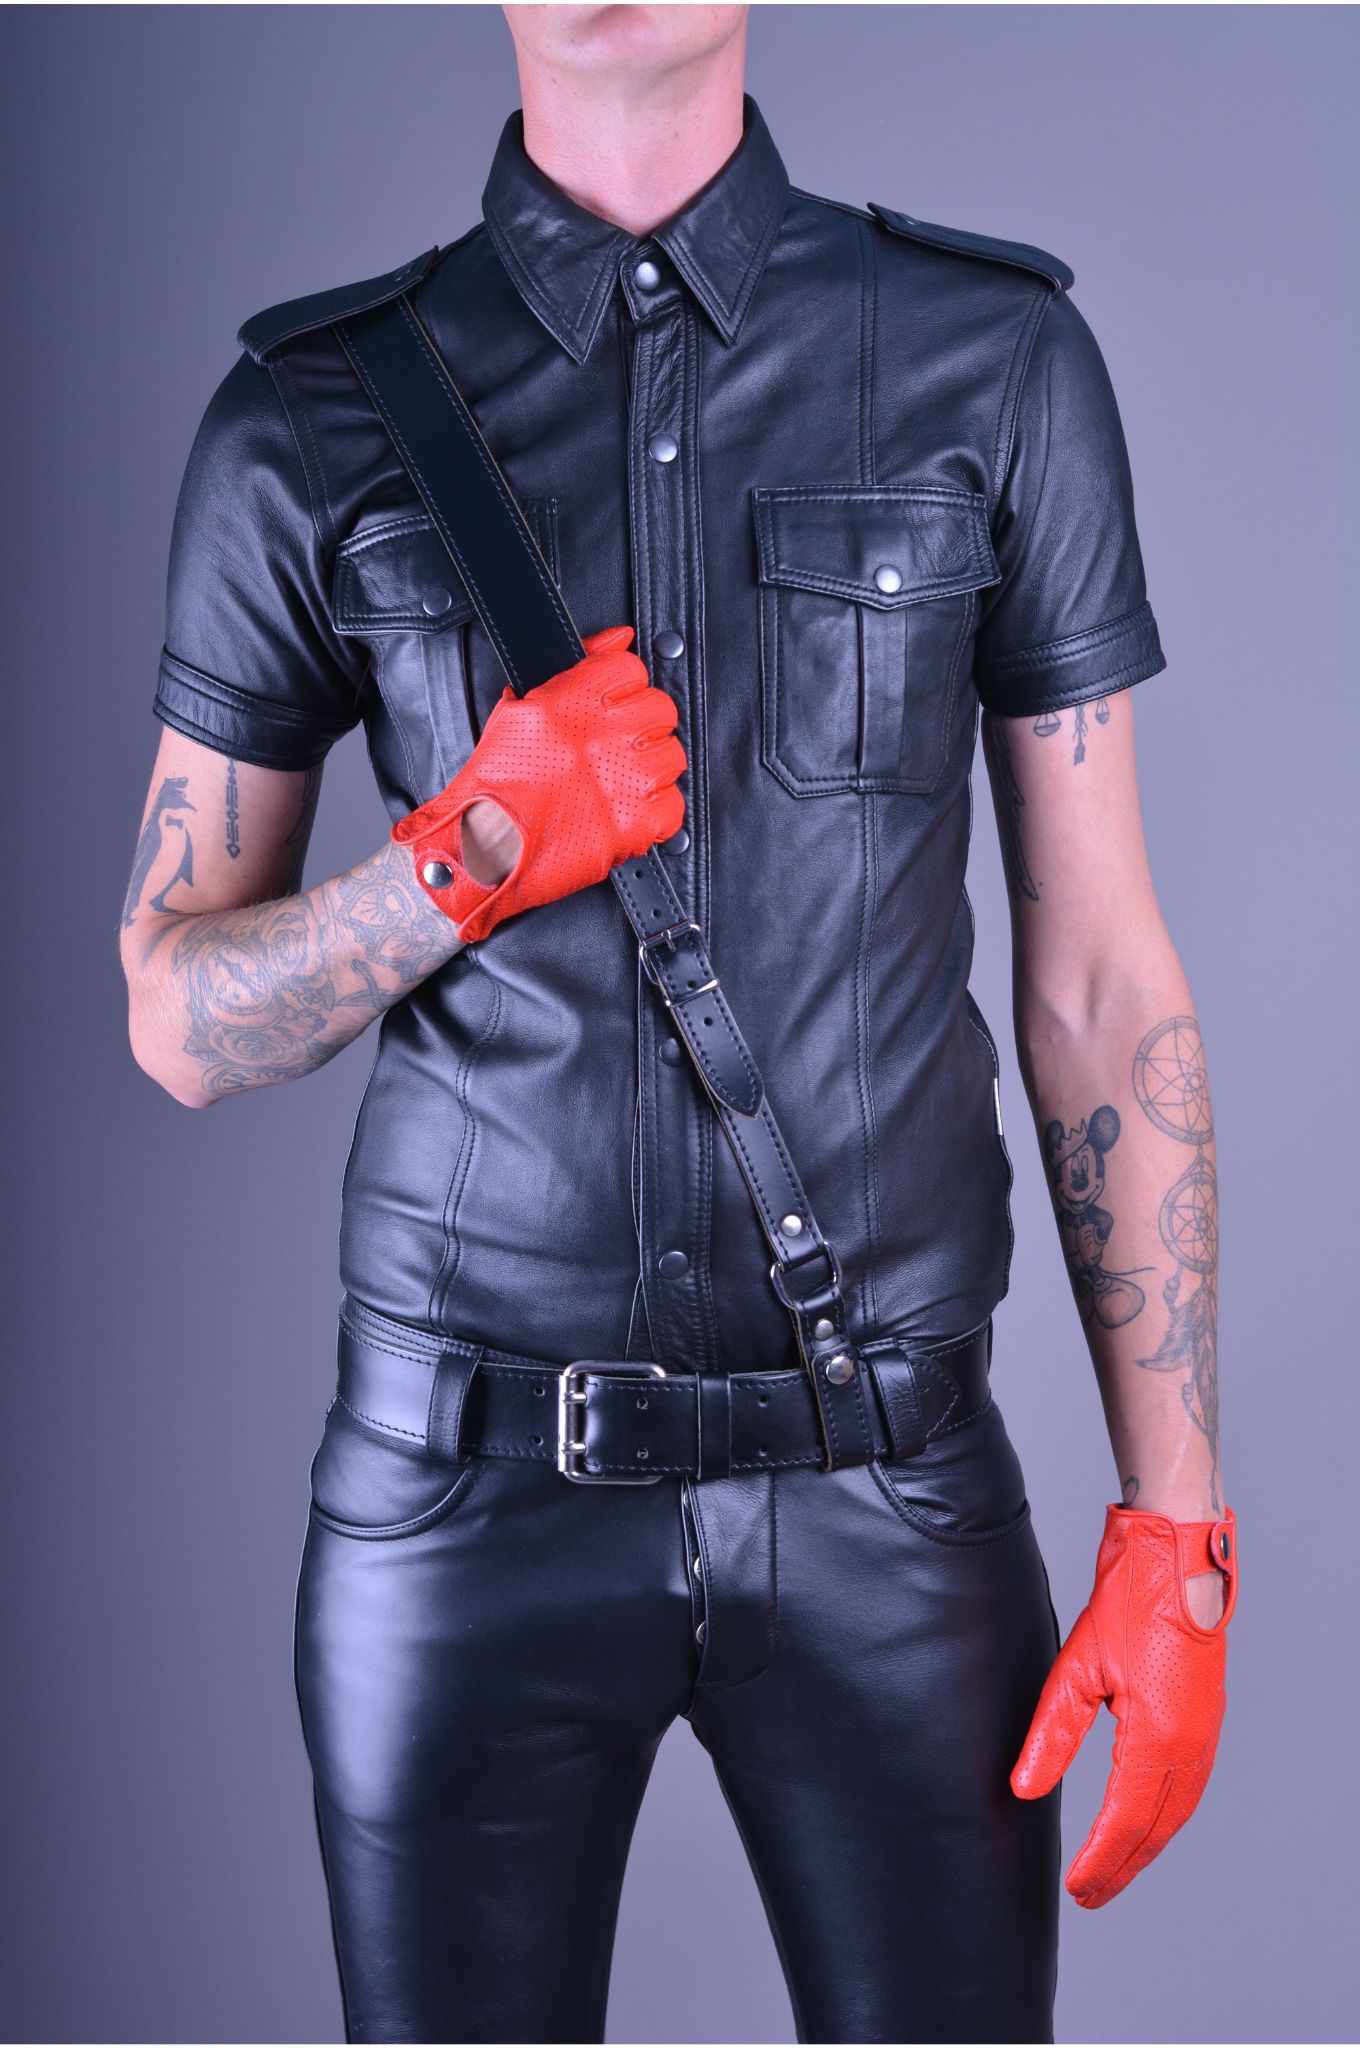 Shop Mister B leather clothing and fetish items